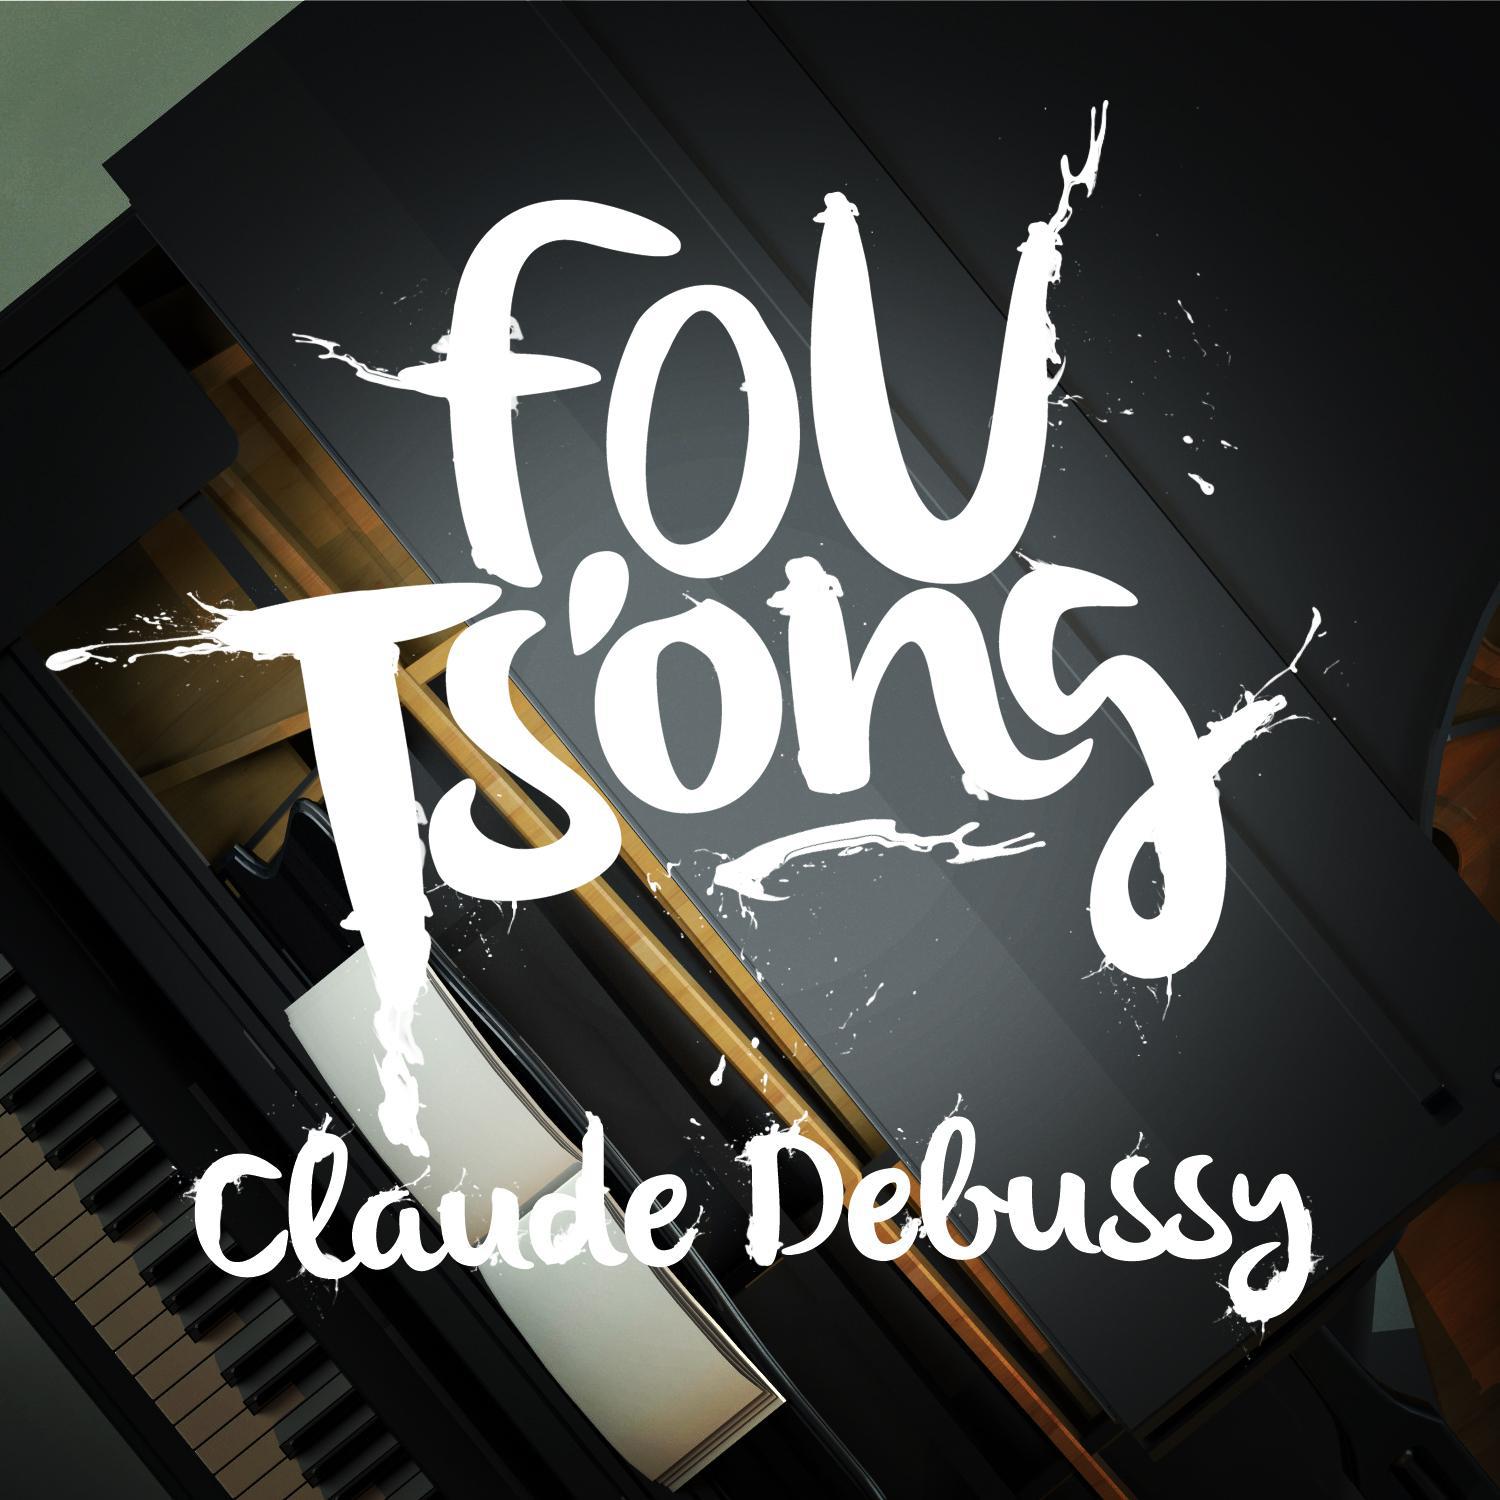 Fou Ts'ong: Claude Debussy专辑